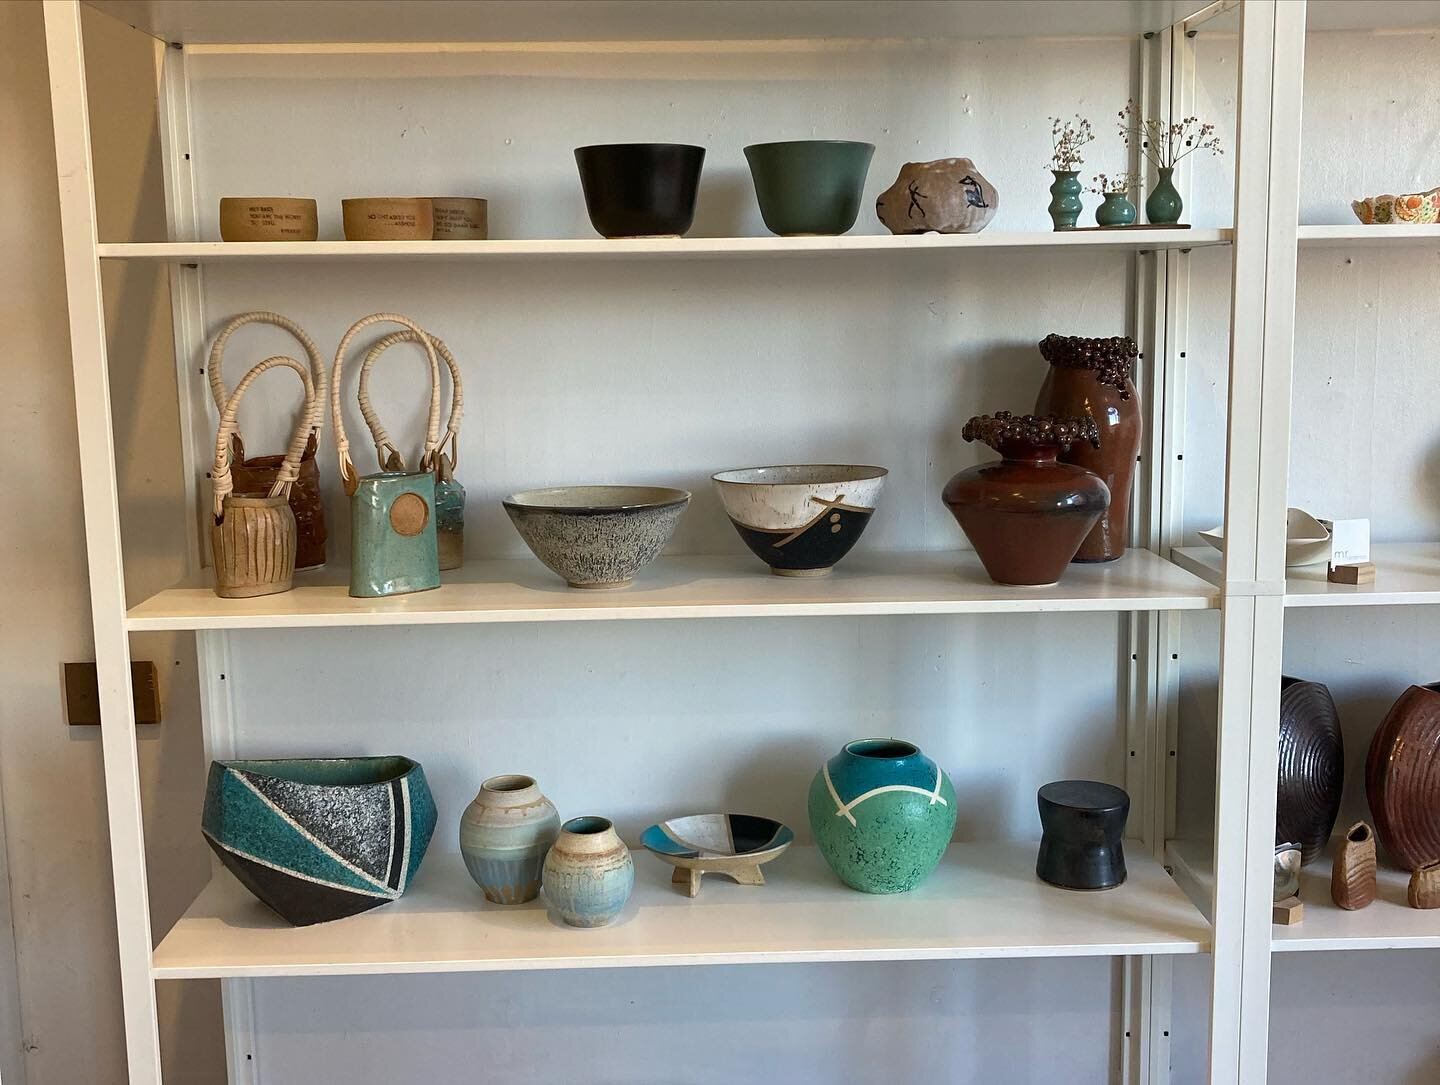 Our gallery is full of beautiful gifts made by our talented members  Weekday hours vary but weekend hours are 10 to 5 #holidayshopping #handmadegifts #brooklynpottery #shoplocal #supportceramicartists #functionalandfabulous #sculpturalceramics #claym